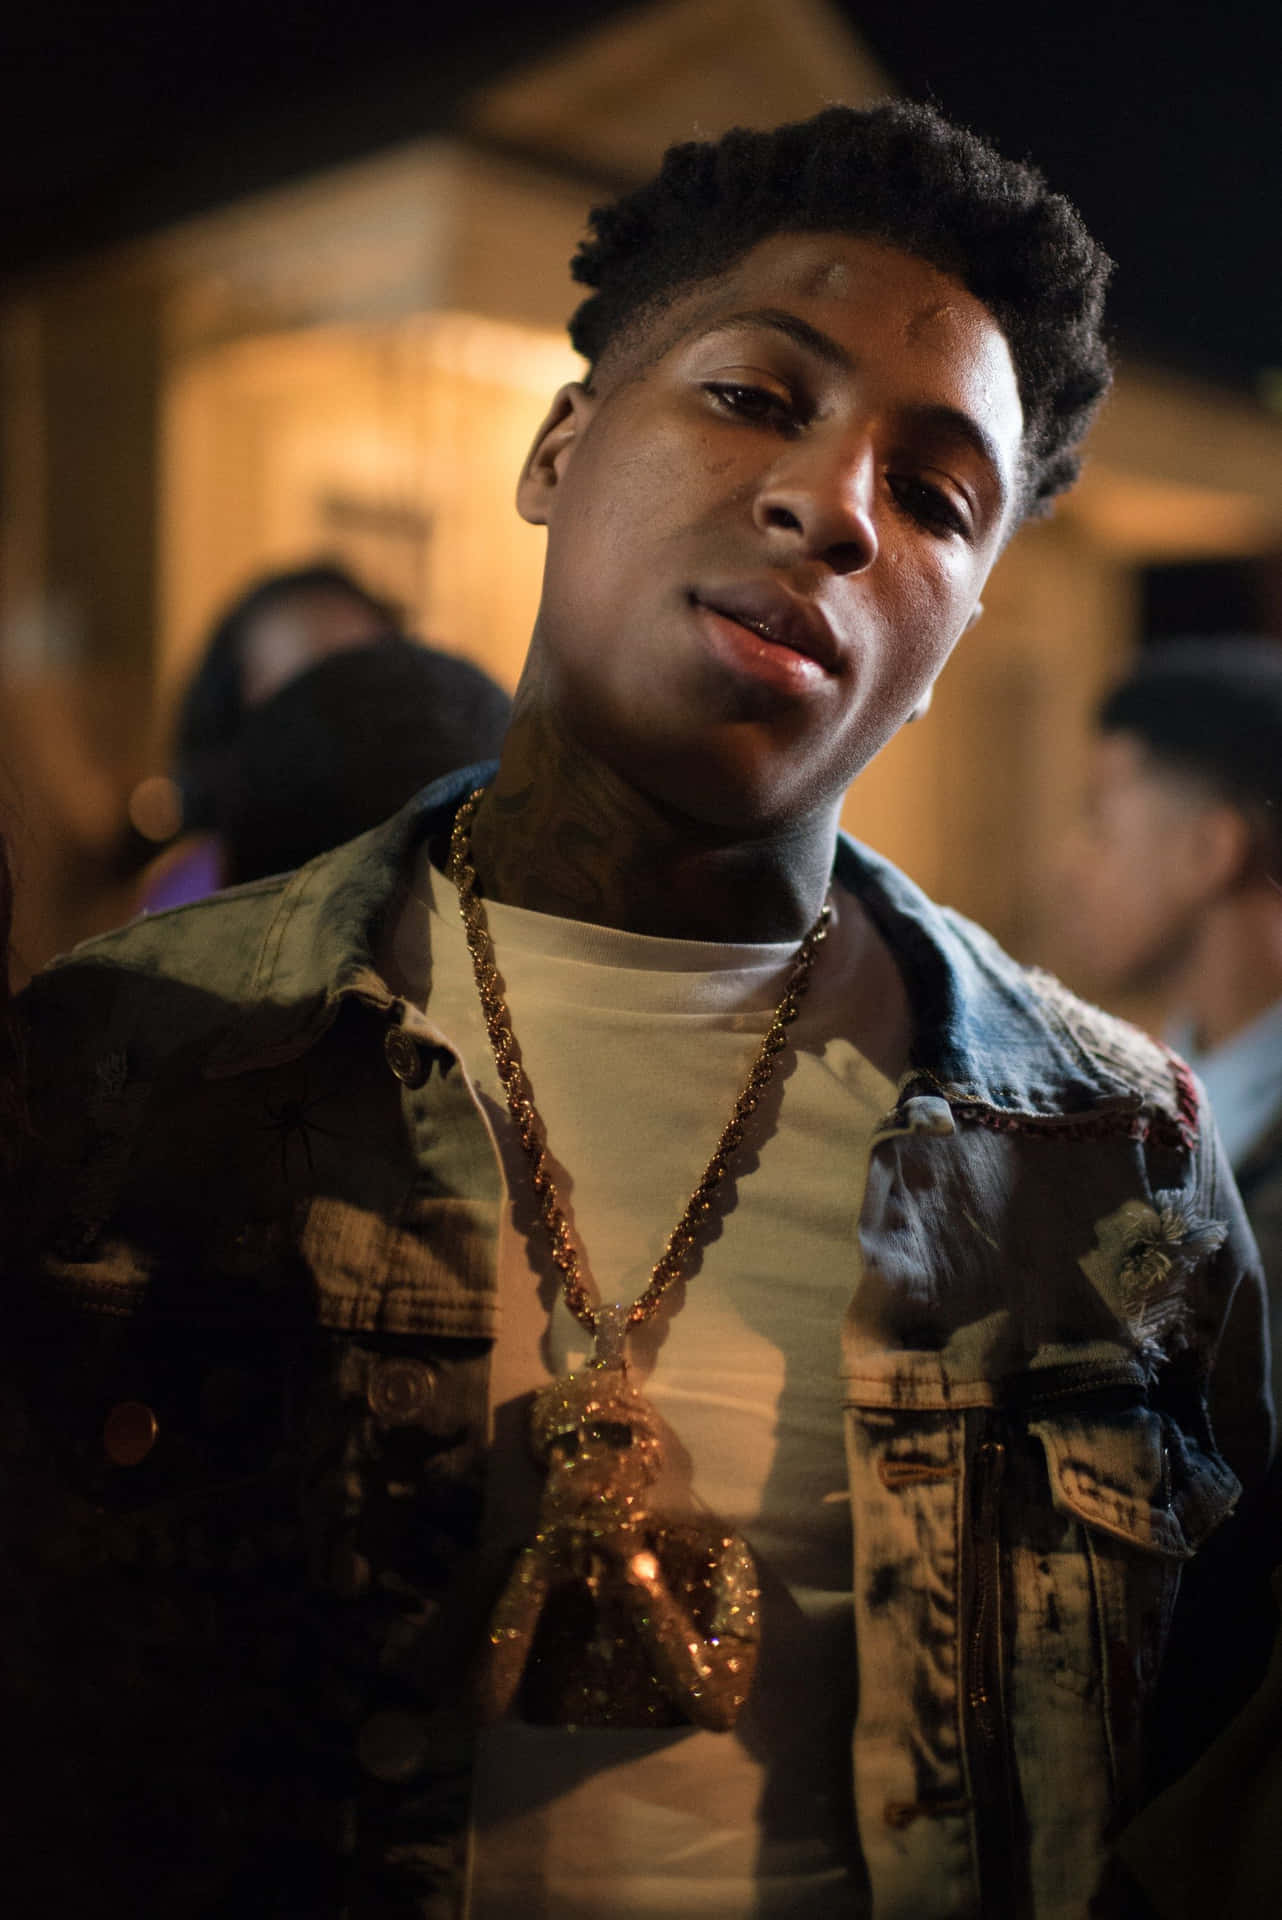 Caption: Nba Youngboy Performing Live On Stage